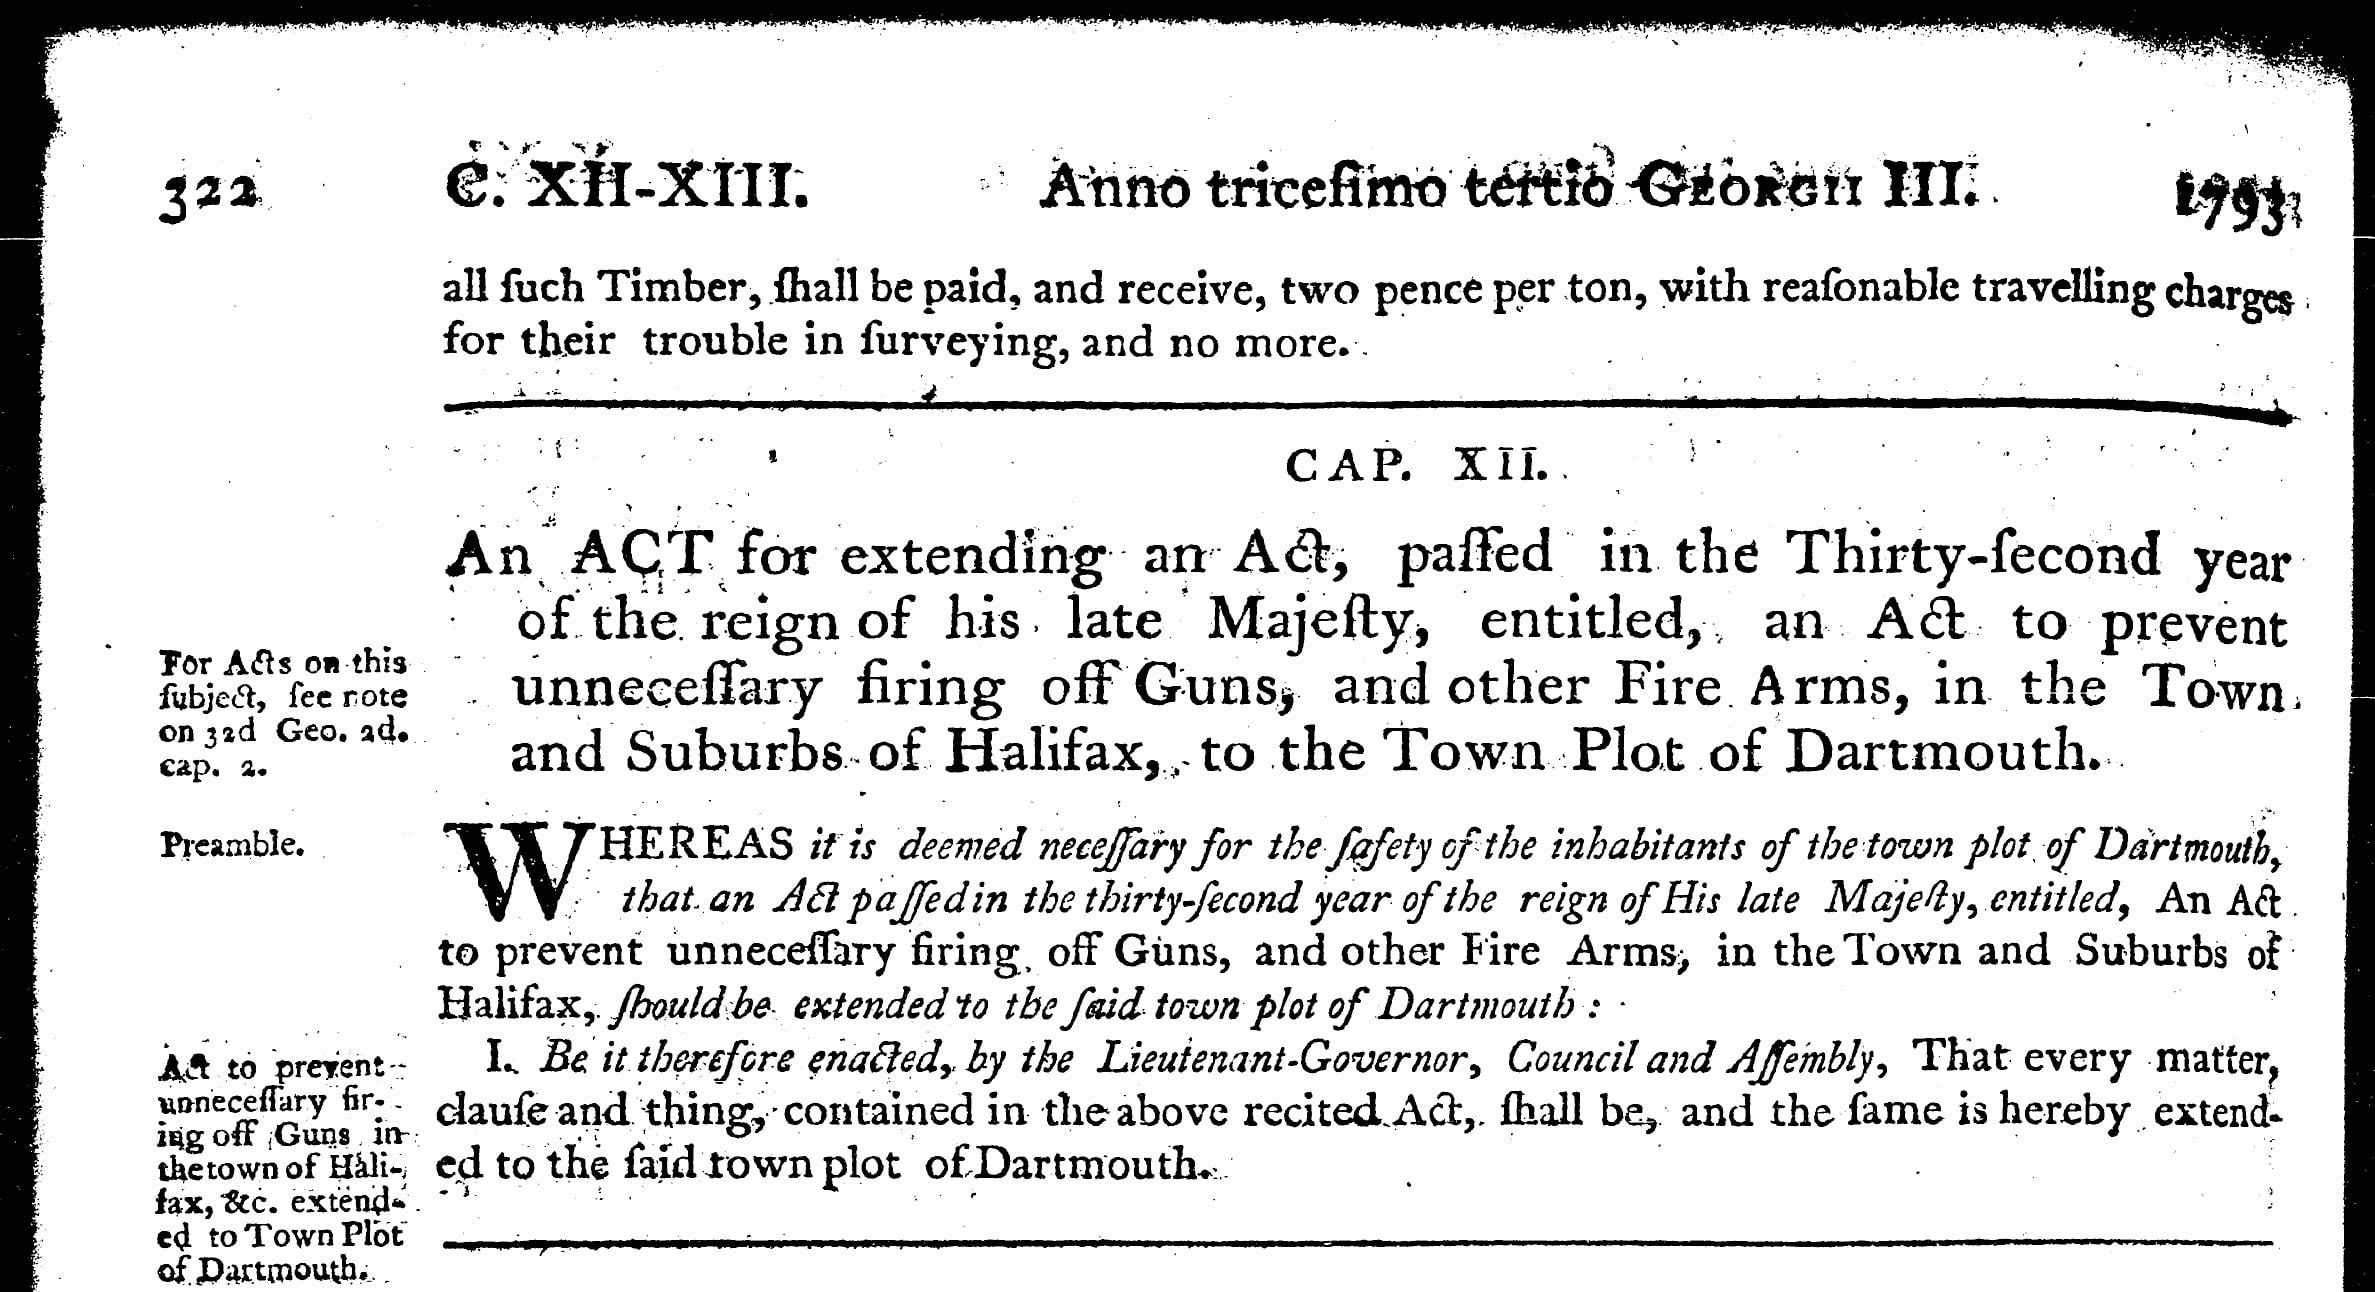 To extend Act respecting Guns and Firearms to (Dartmouth), 1793 c12